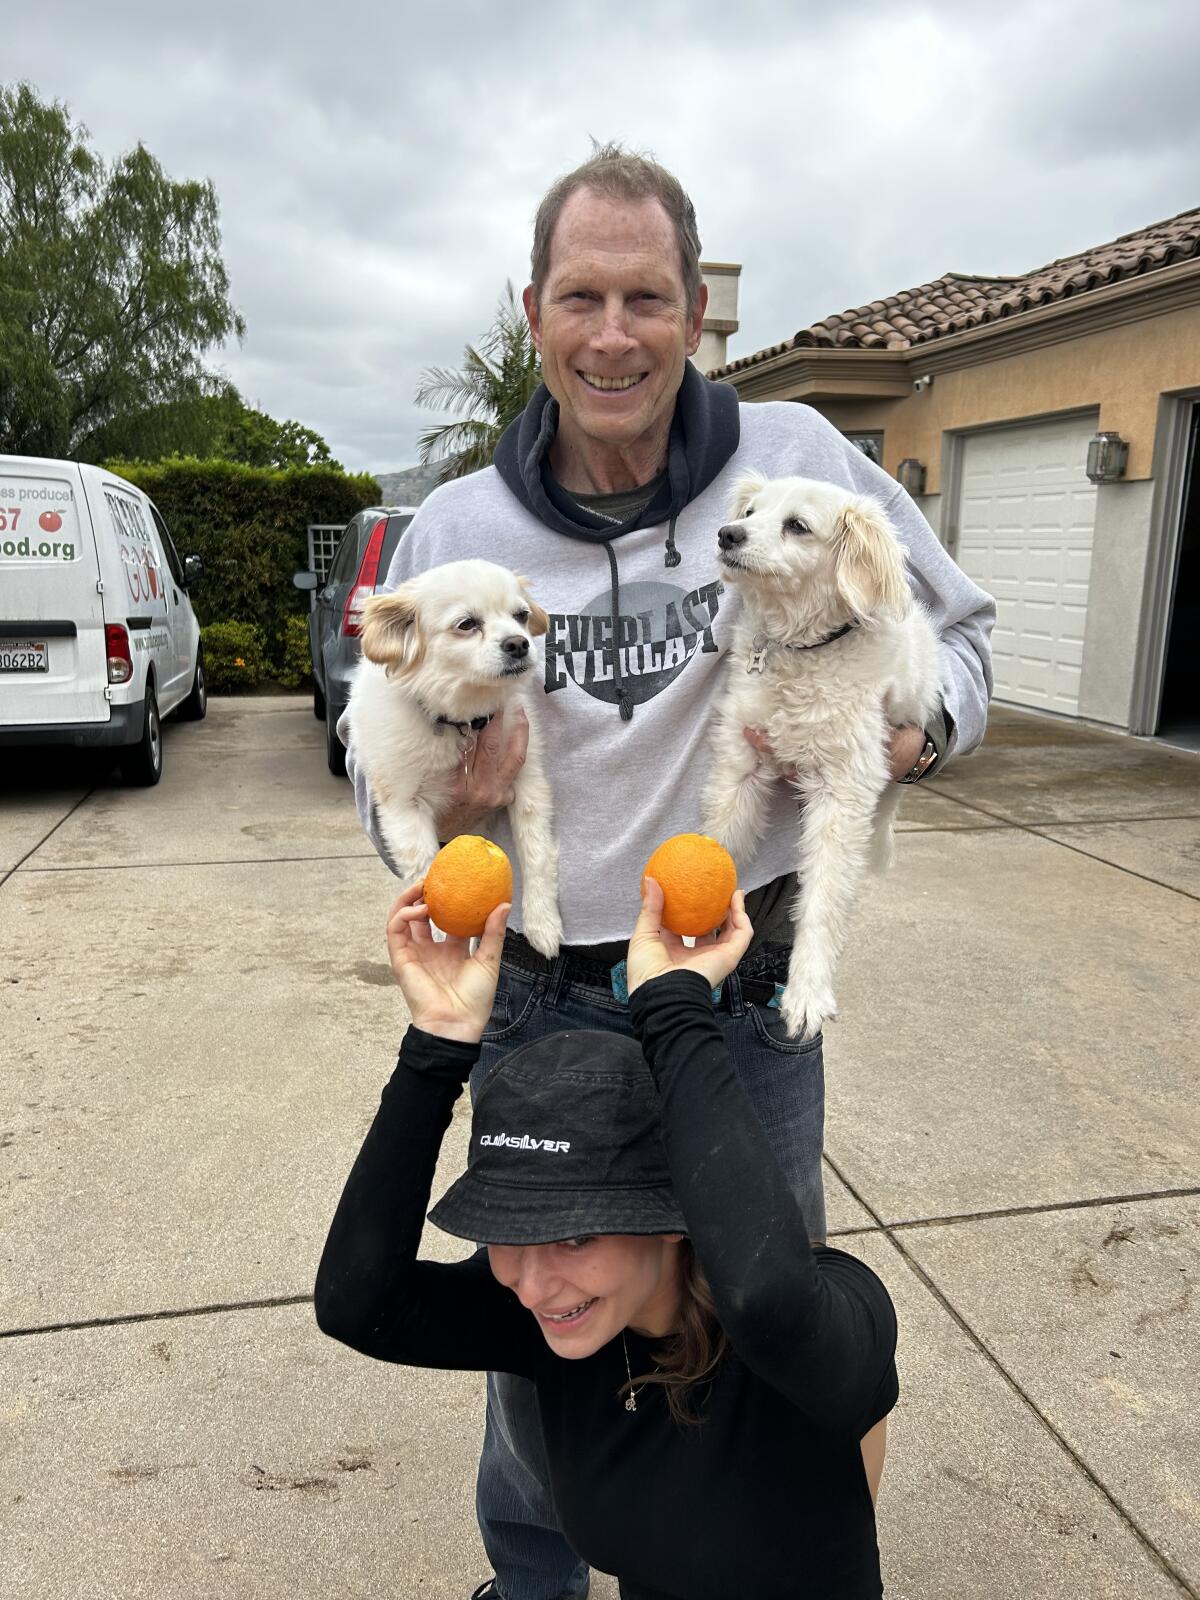 Homeowner Jim Sleeper and his pups Max and Mini were proud to be on the scene for the orange picking event.